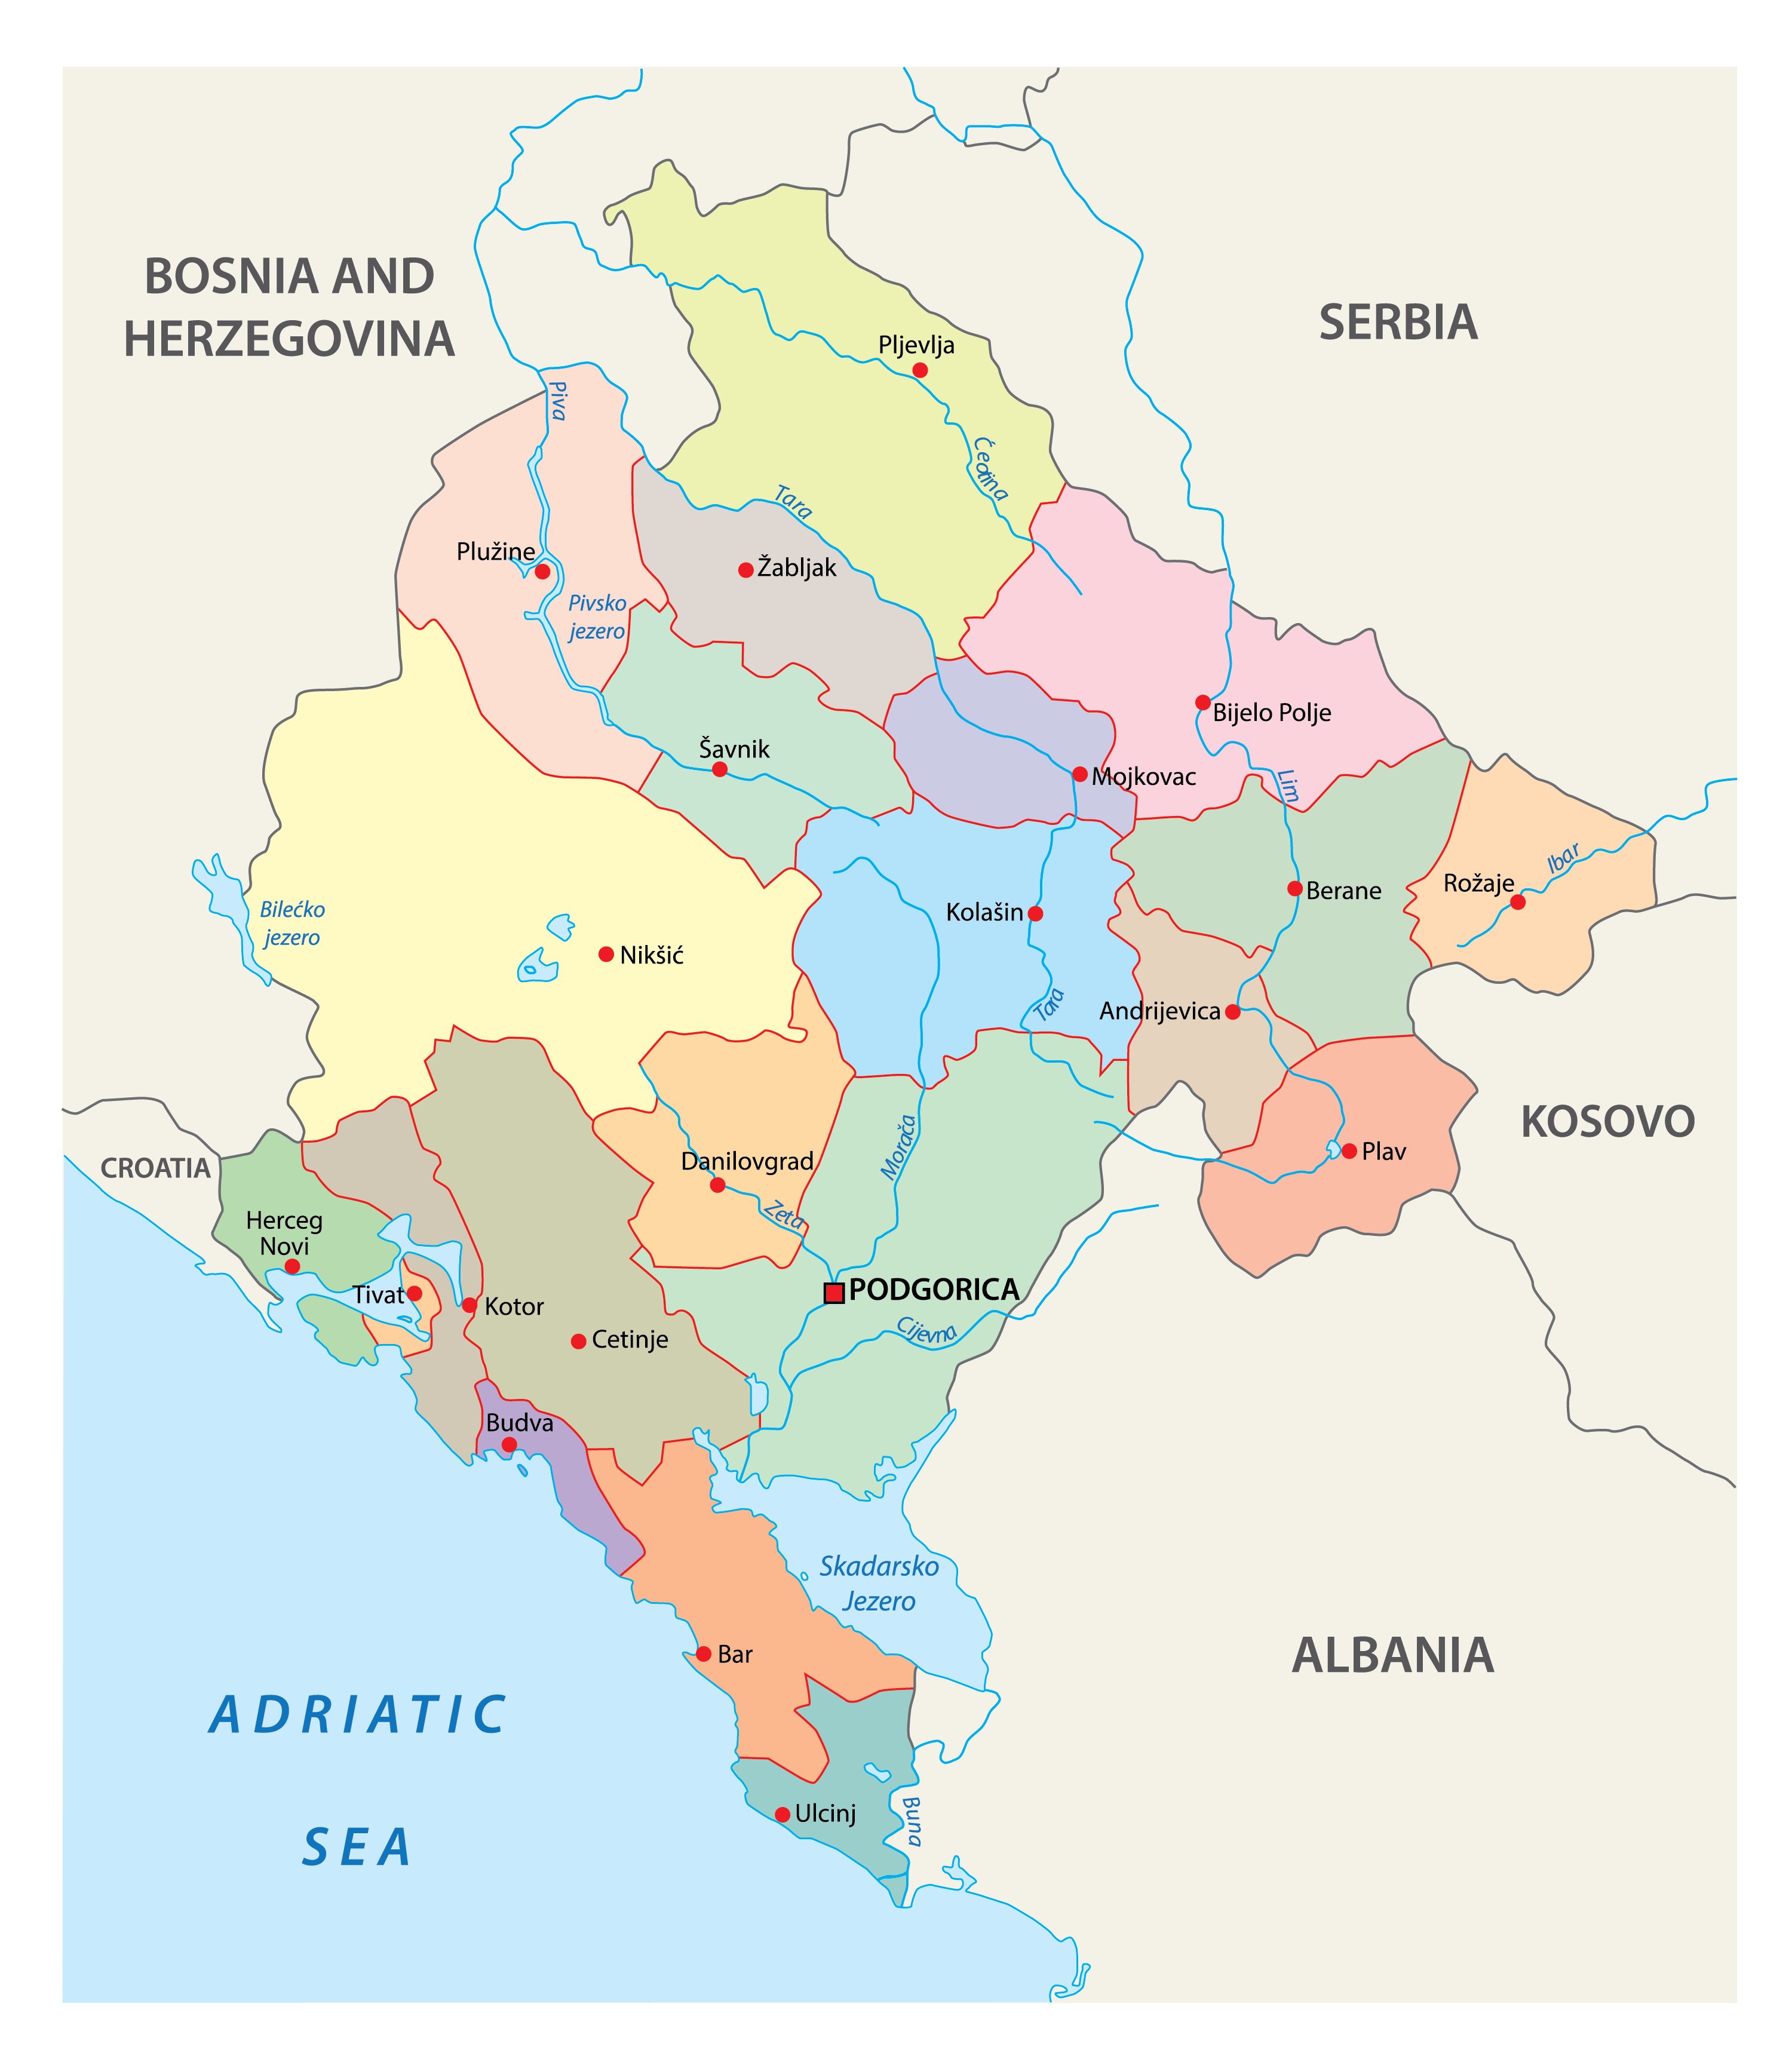 Municipalities Of Montenegro Map represented in different colors